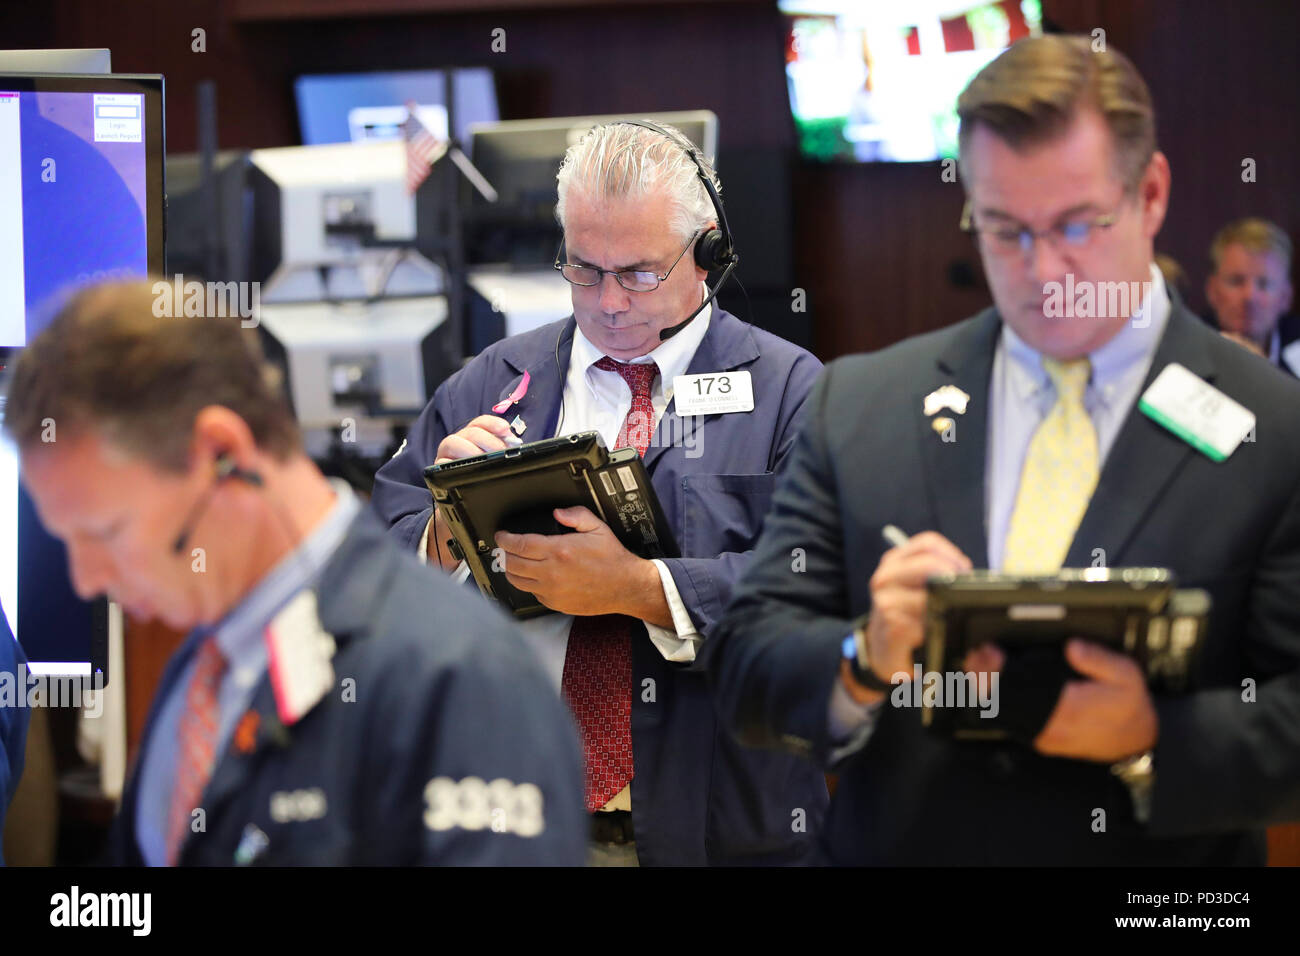 New York, USA. 6th Aug, 2018. Traders work at the New York Stock Exchange in New York, the United States, Aug. 6, 2018. U.S. stocks closed higher on Monday as investors digested a batch of second-quarter corporate earnings reports. The Dow Jones Industrial Average rose 39.60 points, or 0.16 percent, to 25,502.18. The S&P 500 increased 10.05 points, or 0.35 percent, to 2,850.40. The Nasdaq Composite Index rose 47.66 points, or 0.61 percent, to 7,859.68. Credit: Wang Ying/Xinhua/Alamy Live News Stock Photo